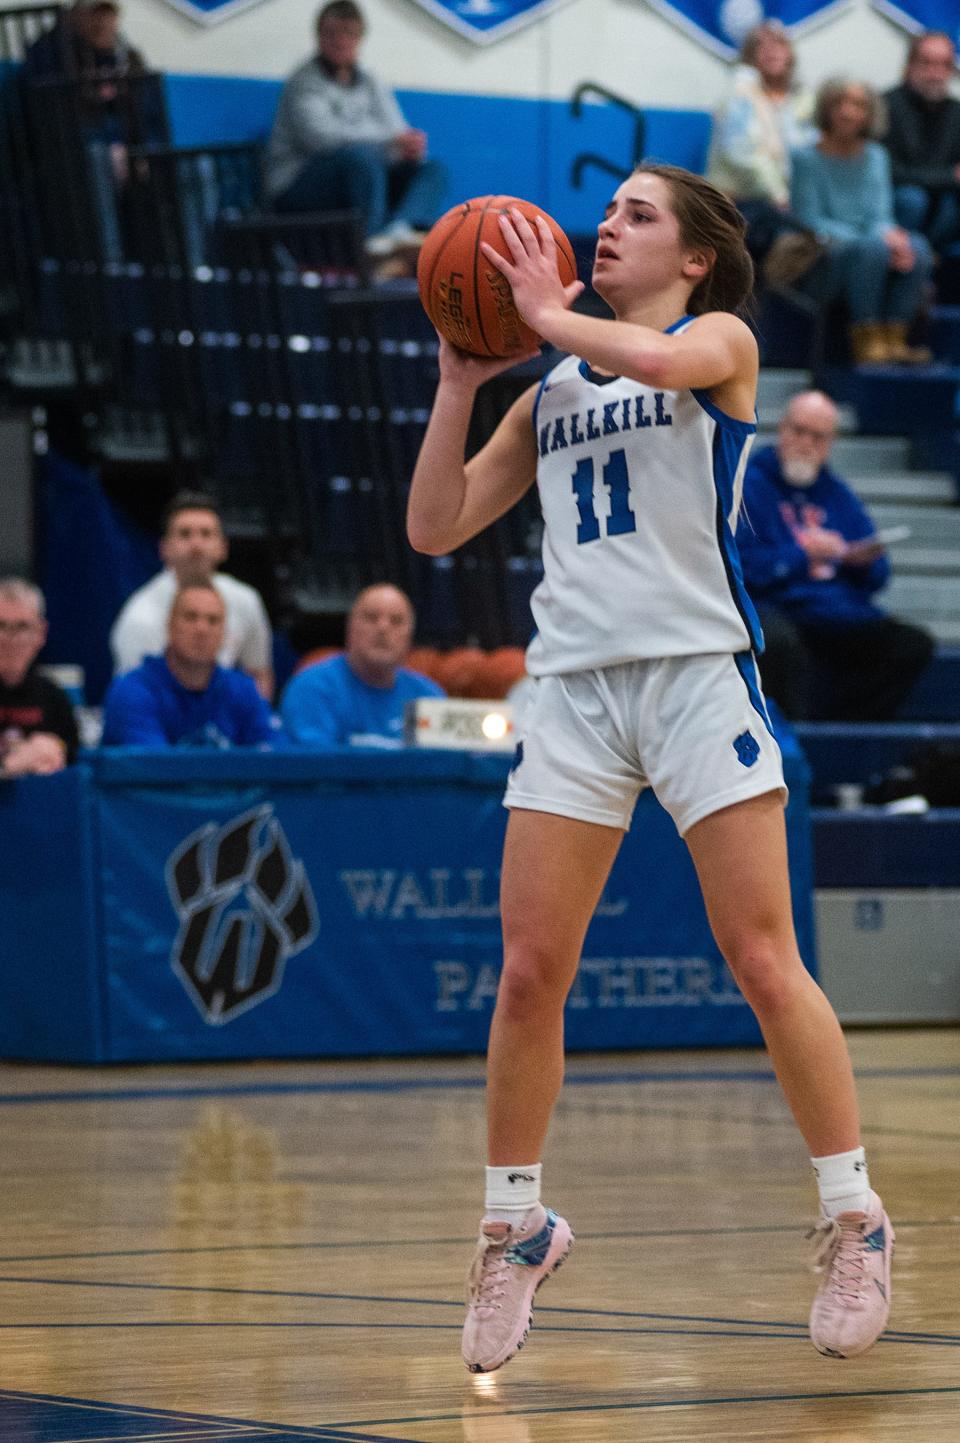 Wallkill's Zoe Mesuch shoots during the MHAL semifinal girls basketball game in Wallkill on Monday, February 20, 2023.